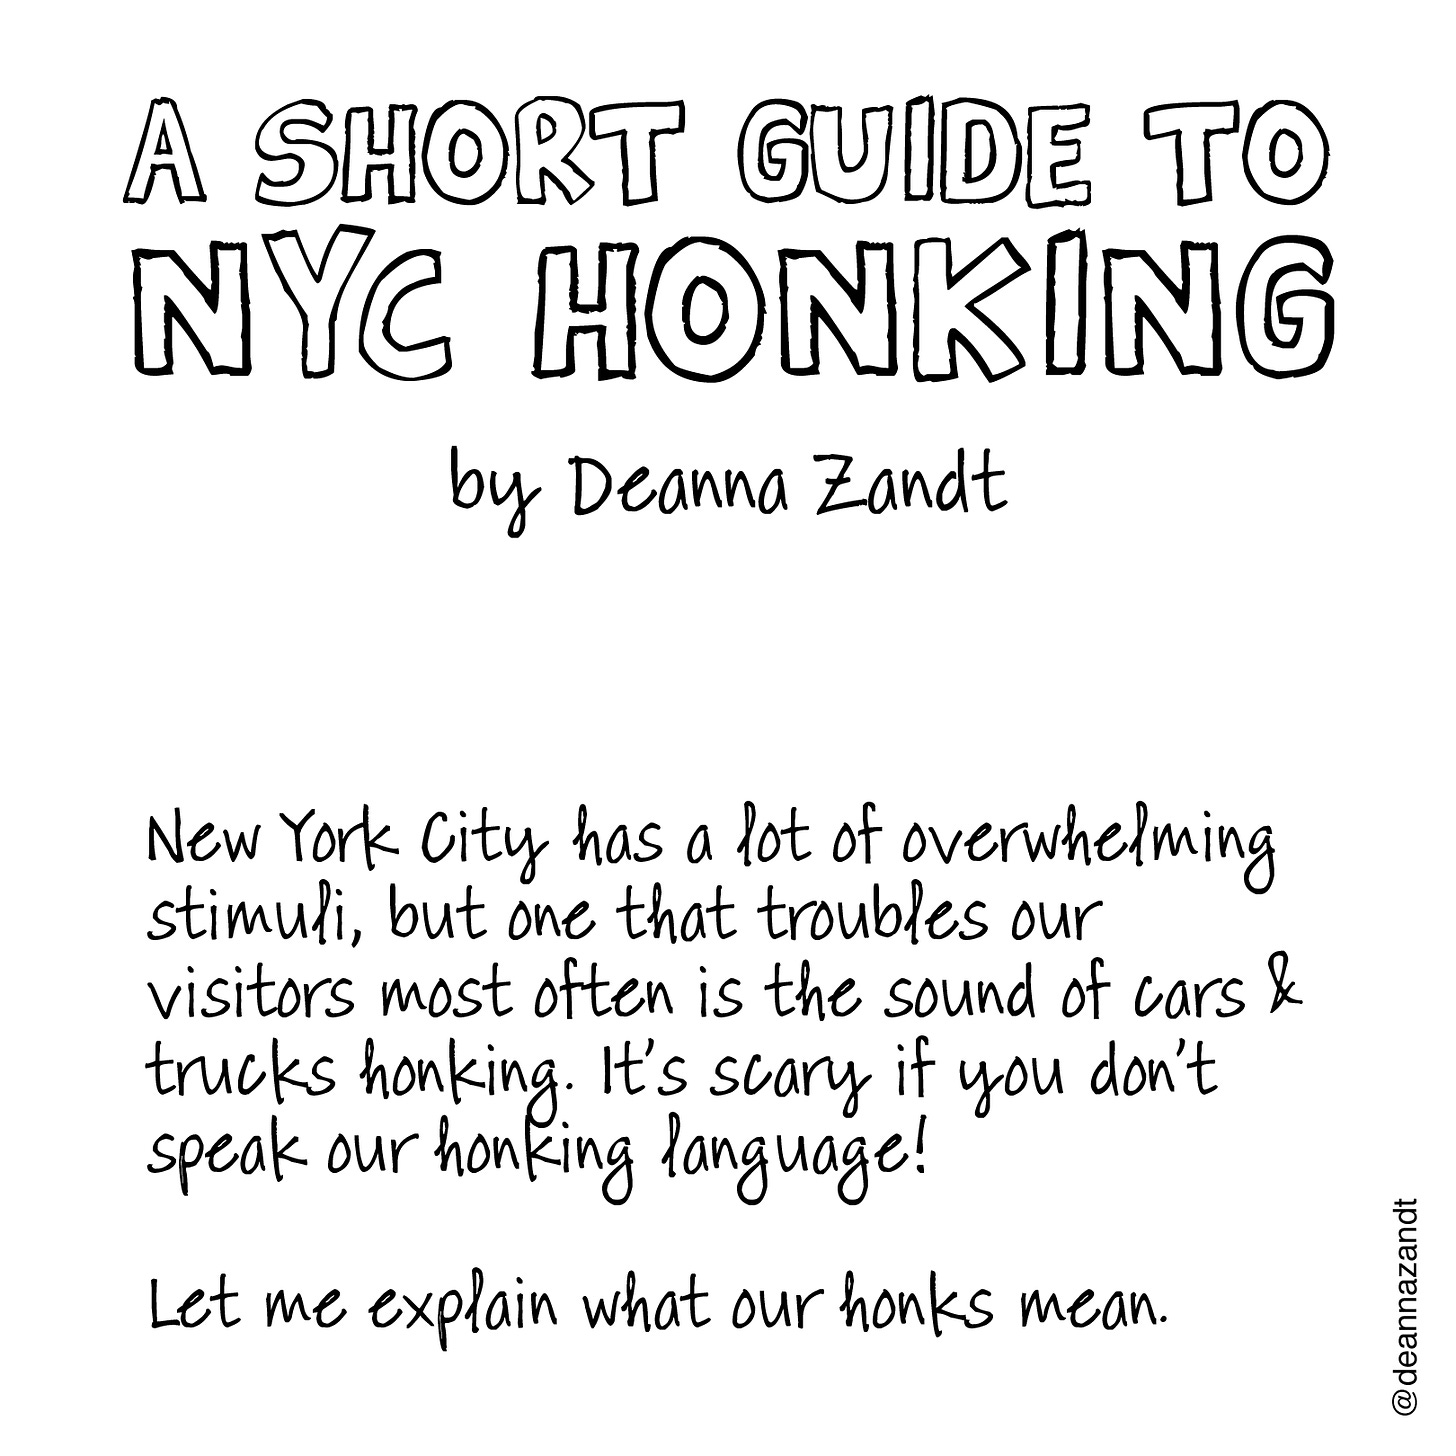 Slide 1: A SHORT GUIDE TO NYC HONKING by Deanna Zandt. New York City has a lot of overwhelming stimuli, but one that troubles our visitors most often is the sound of cars & trucks honking. It’s scary if you don’t speak our honking language!  Let me explain what our honks mean.